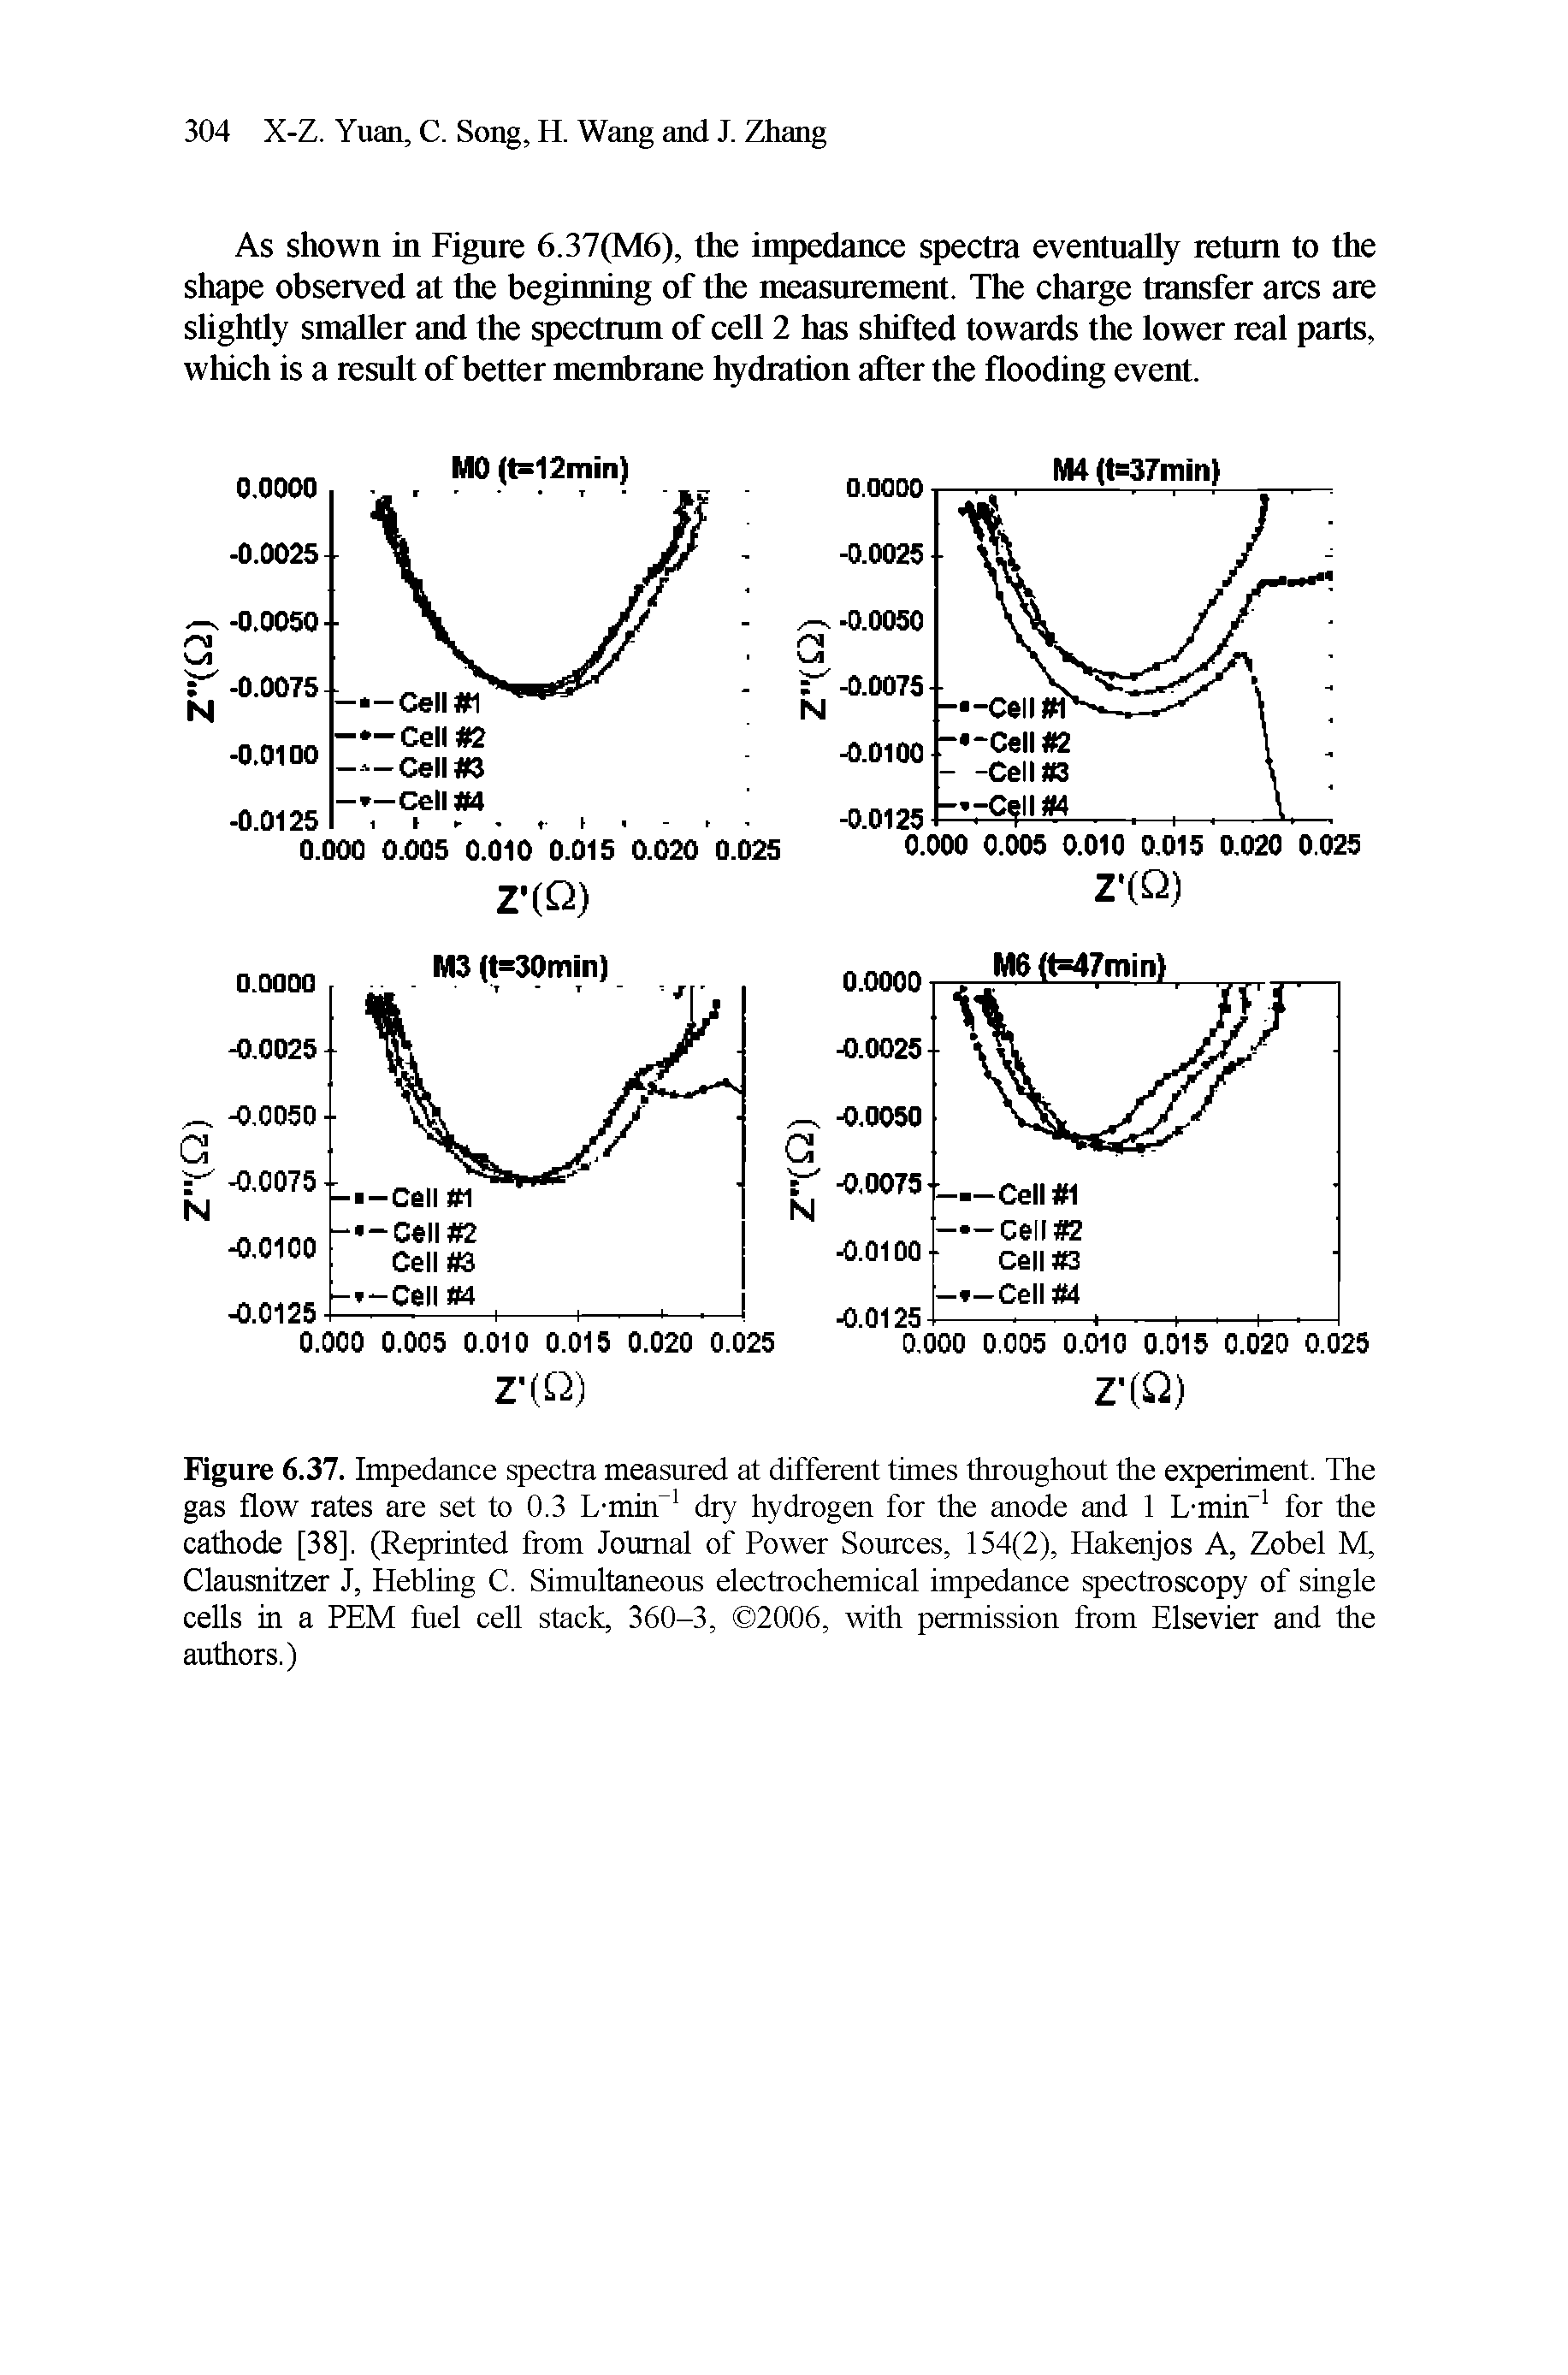 Figure 6.37. Impedance spectra measured at different times throughout the experiment. The gas flow rates are set to 0.3 L-mkf1 dry hydrogen for the anode and 1 L-min 1 for the cathode [38], (Reprinted from Journal of Power Sources, 154(2), Hakenjos A, Zobel M, Clausnitzer J, Hebling C. Simultaneous electrochemical impedance spectroscopy of single cells in a PEM fuel cell stack, 360-3, 2006, with permission from Elsevier and the authors.)...